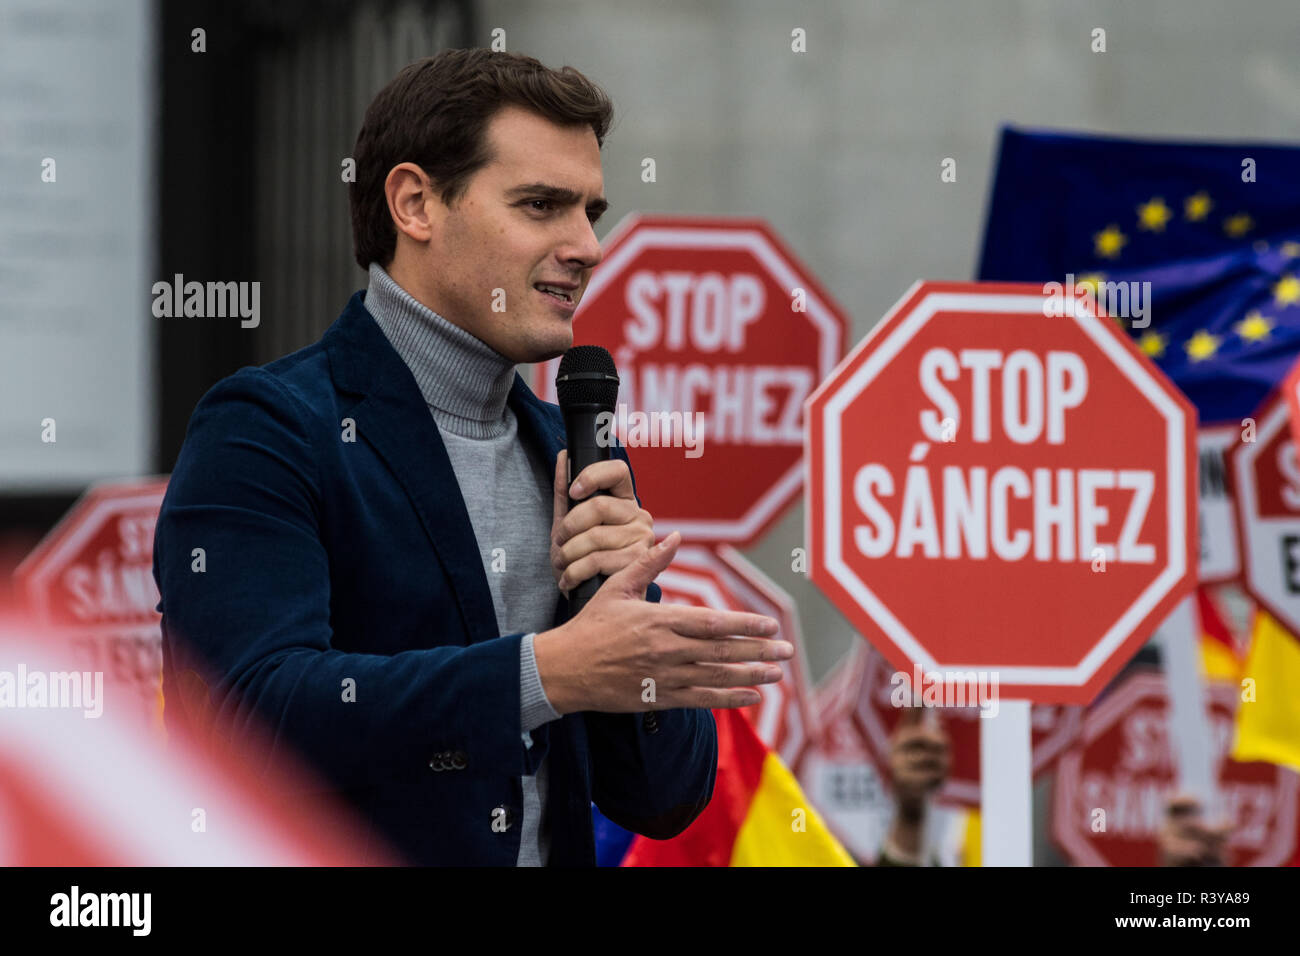 Madrid, Spain. 24th Nov, 2018. Albert Rivera, leader of Ciudadanos Party during a protest against Prime Minister Pedro Sanchez's policies with the Catalan independence process. Albert Rivera leader of Ciudadanos protested against Government for a possible pardon in case the jailed pro independence Catalan leaders are finally accused of sedition. Credit: Marcos del Mazo/Alamy Live News Stock Photo